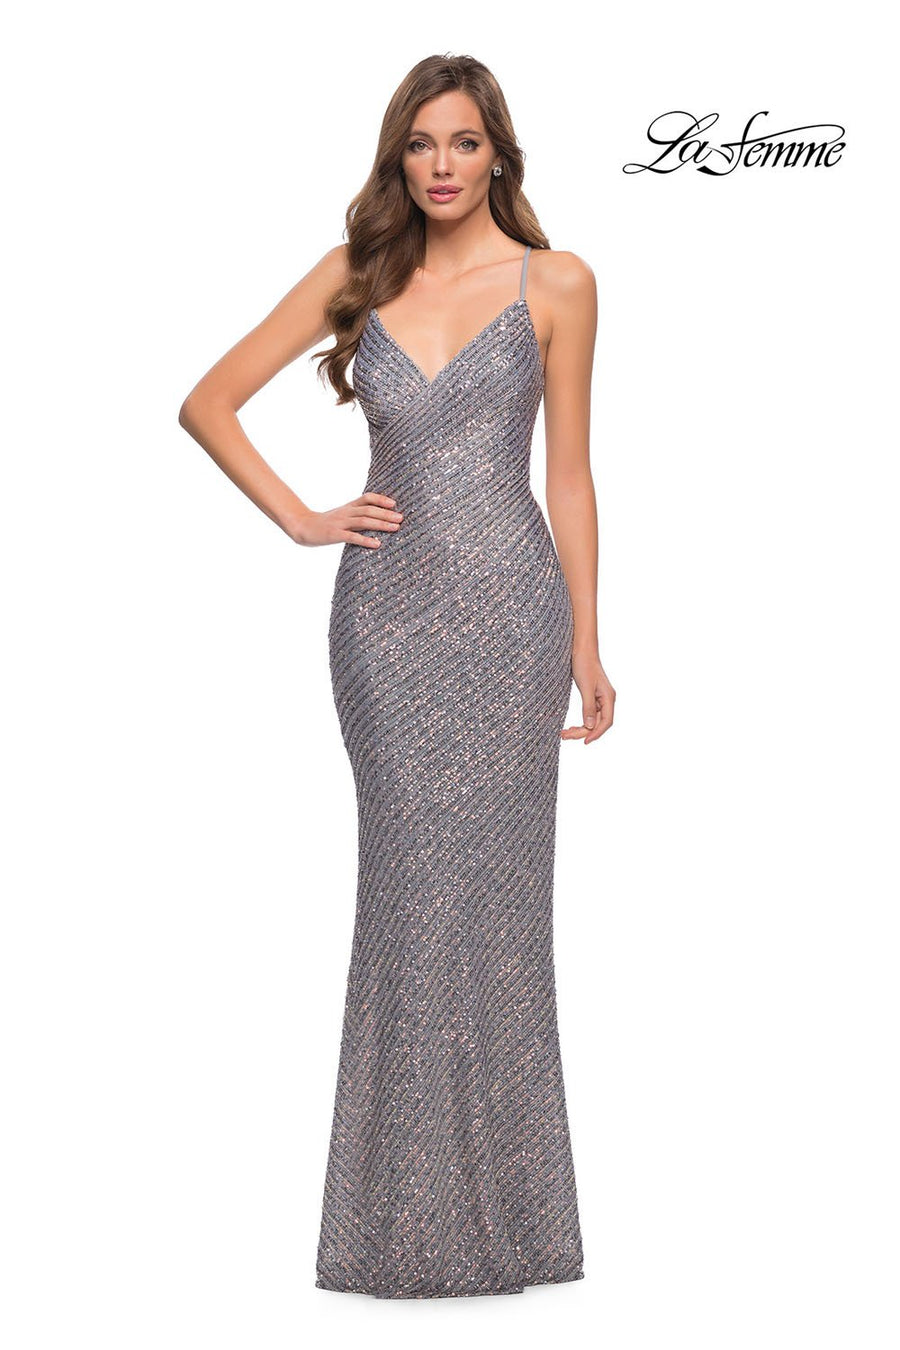 La Femme 29895 prom dress images.  La Femme 29895 is available in these colors: Silver.